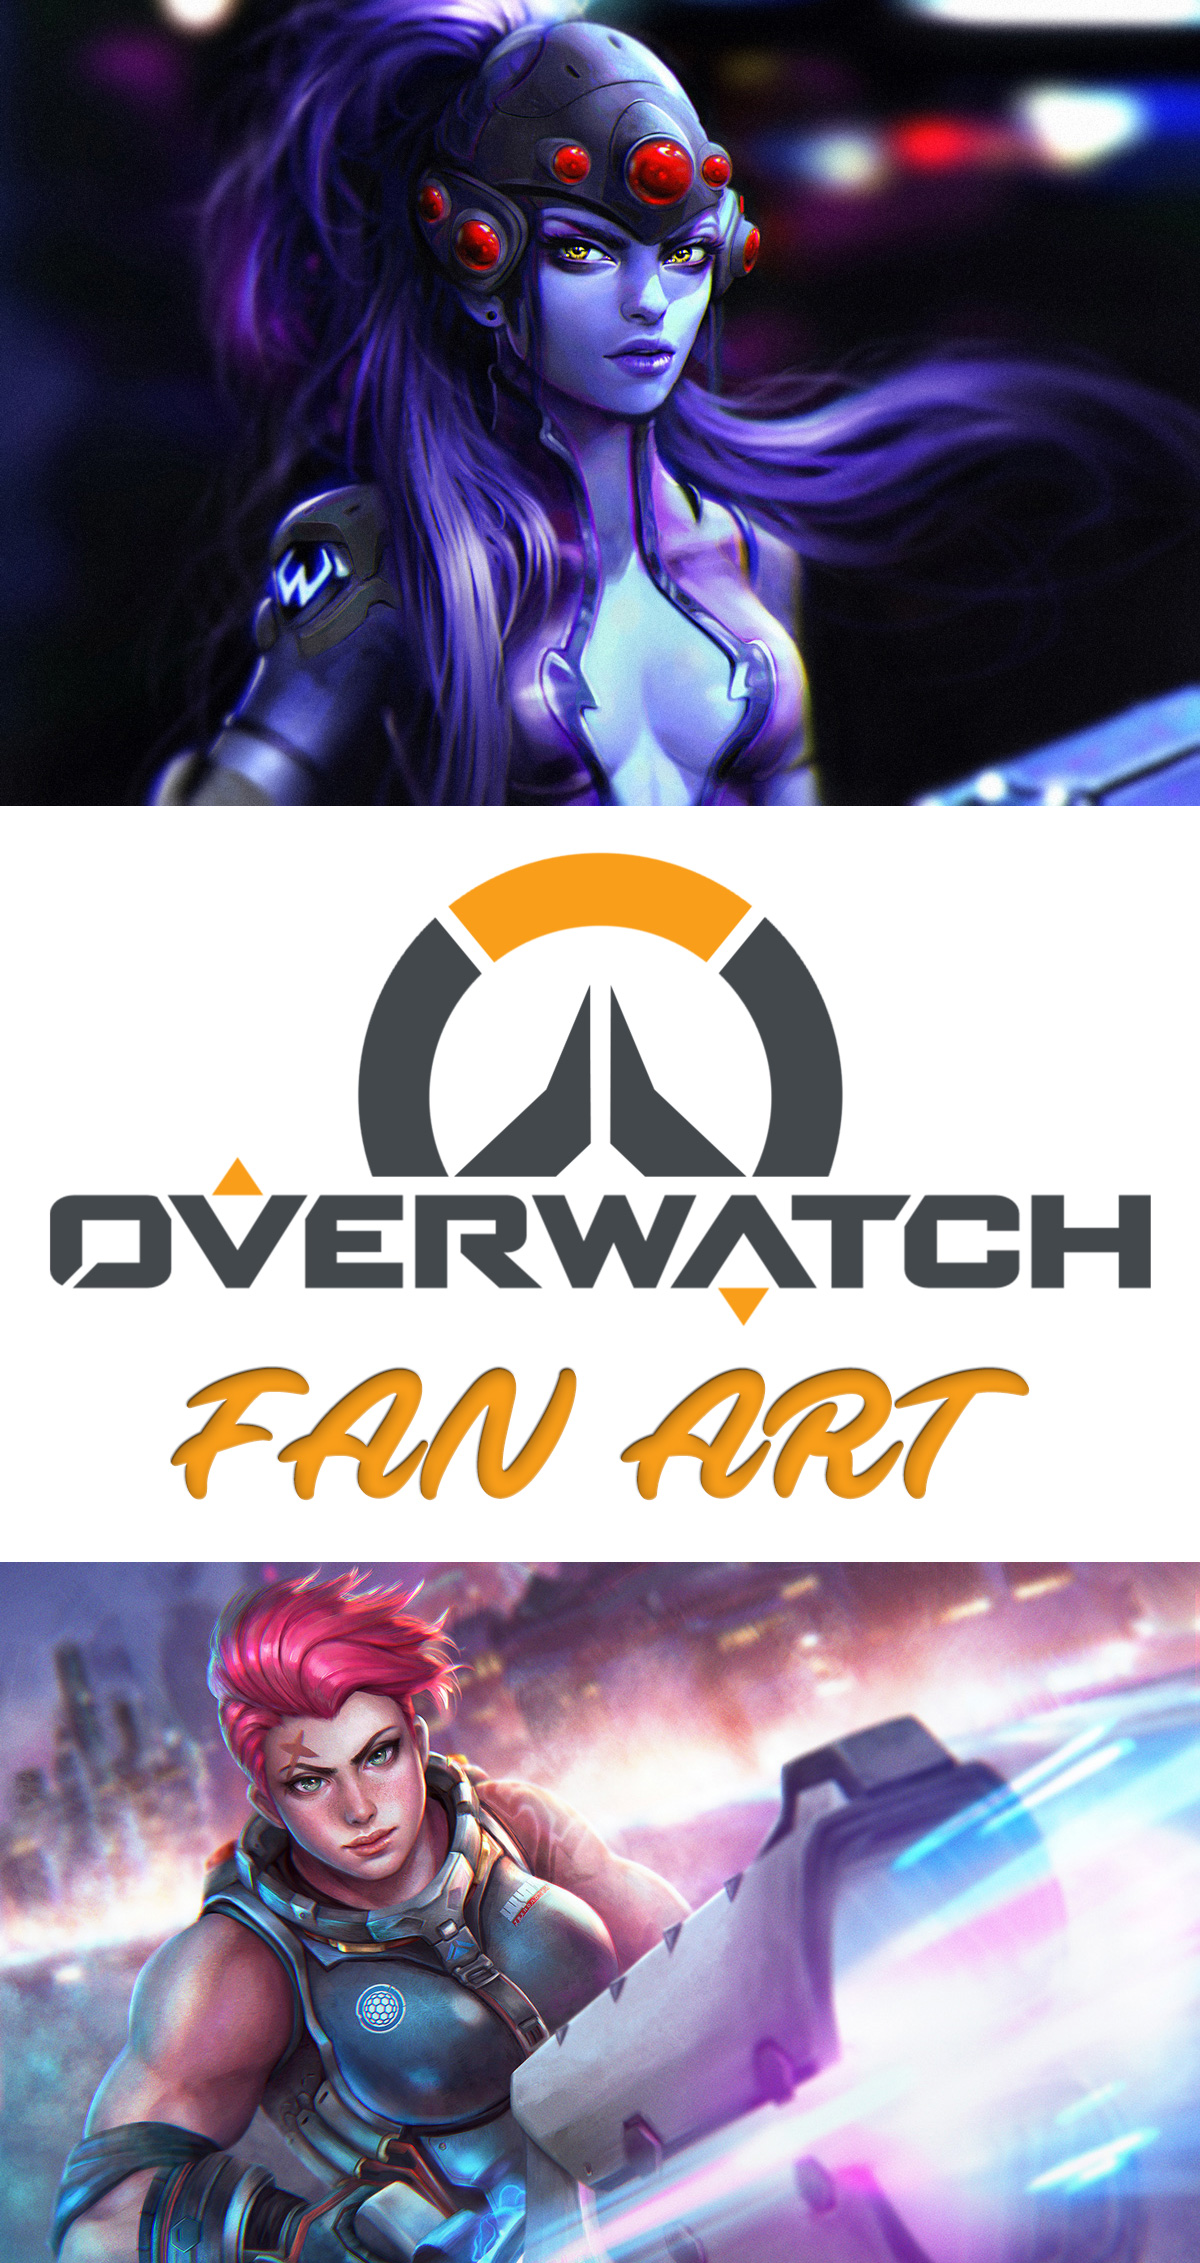 25 Awesome Overwatch Fan Art Gamers Will Love